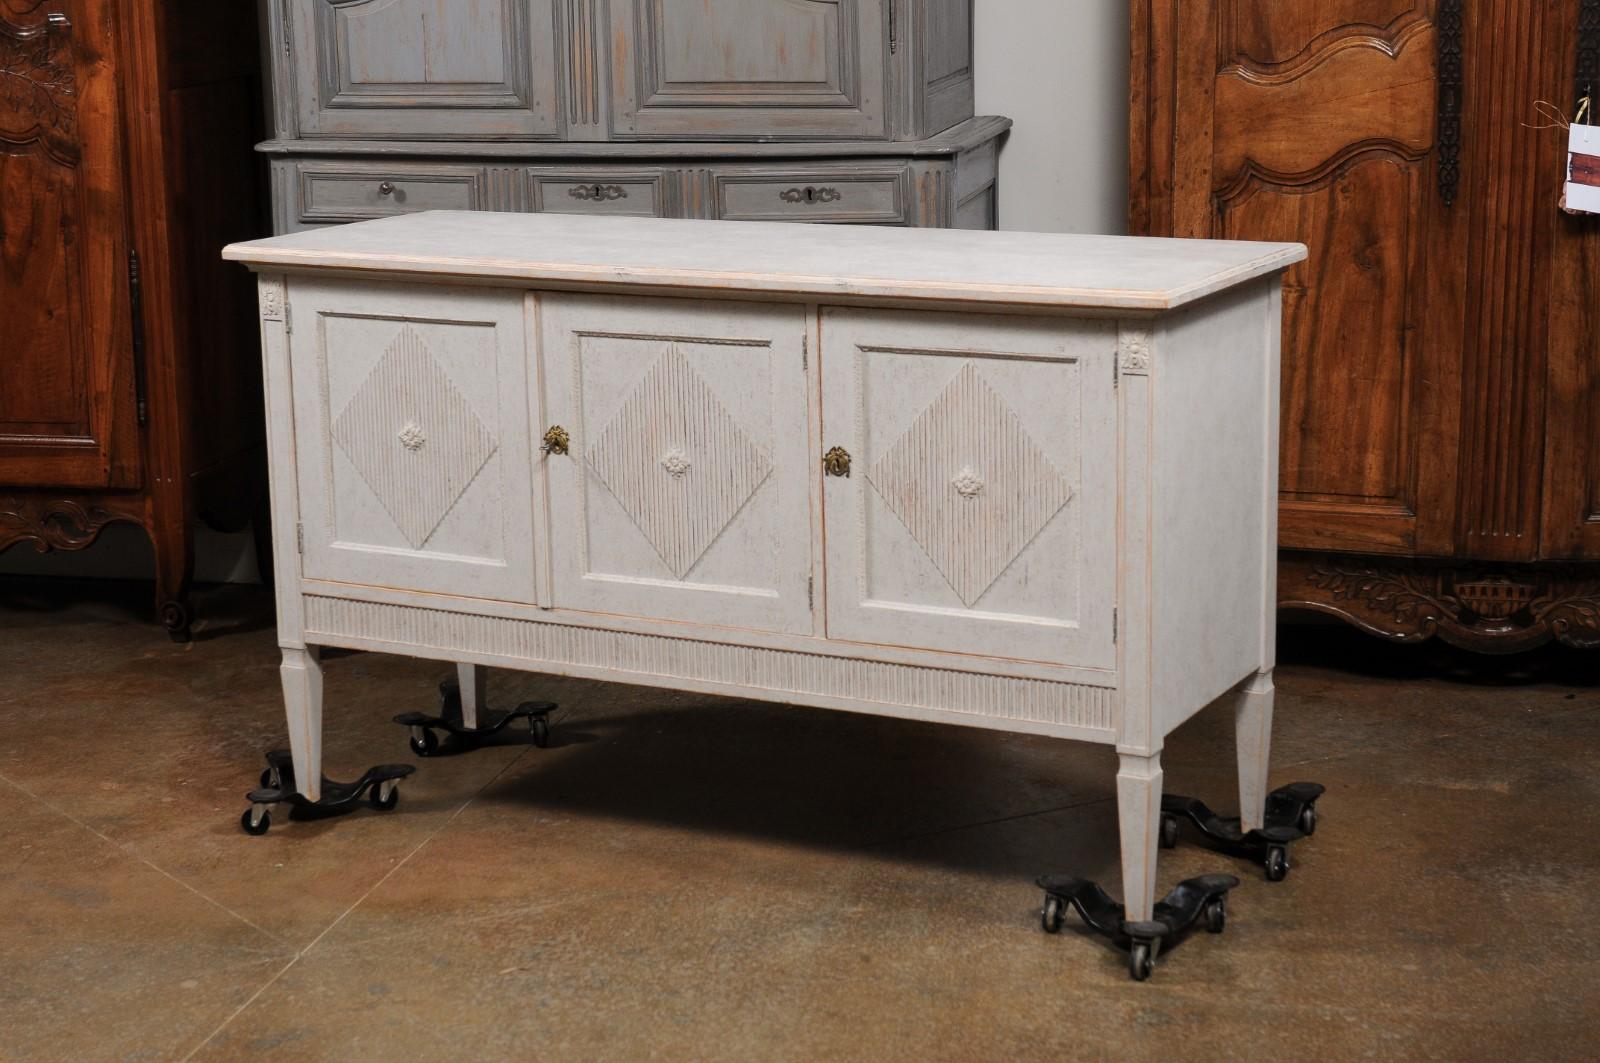 A Swedish Gustavian style painted wood sideboard from the early 20th century, with three doors and fluted diamond motifs. Created in Sweden during the early years of the 20th century, this painted sideboard features a rectangular top sitting above